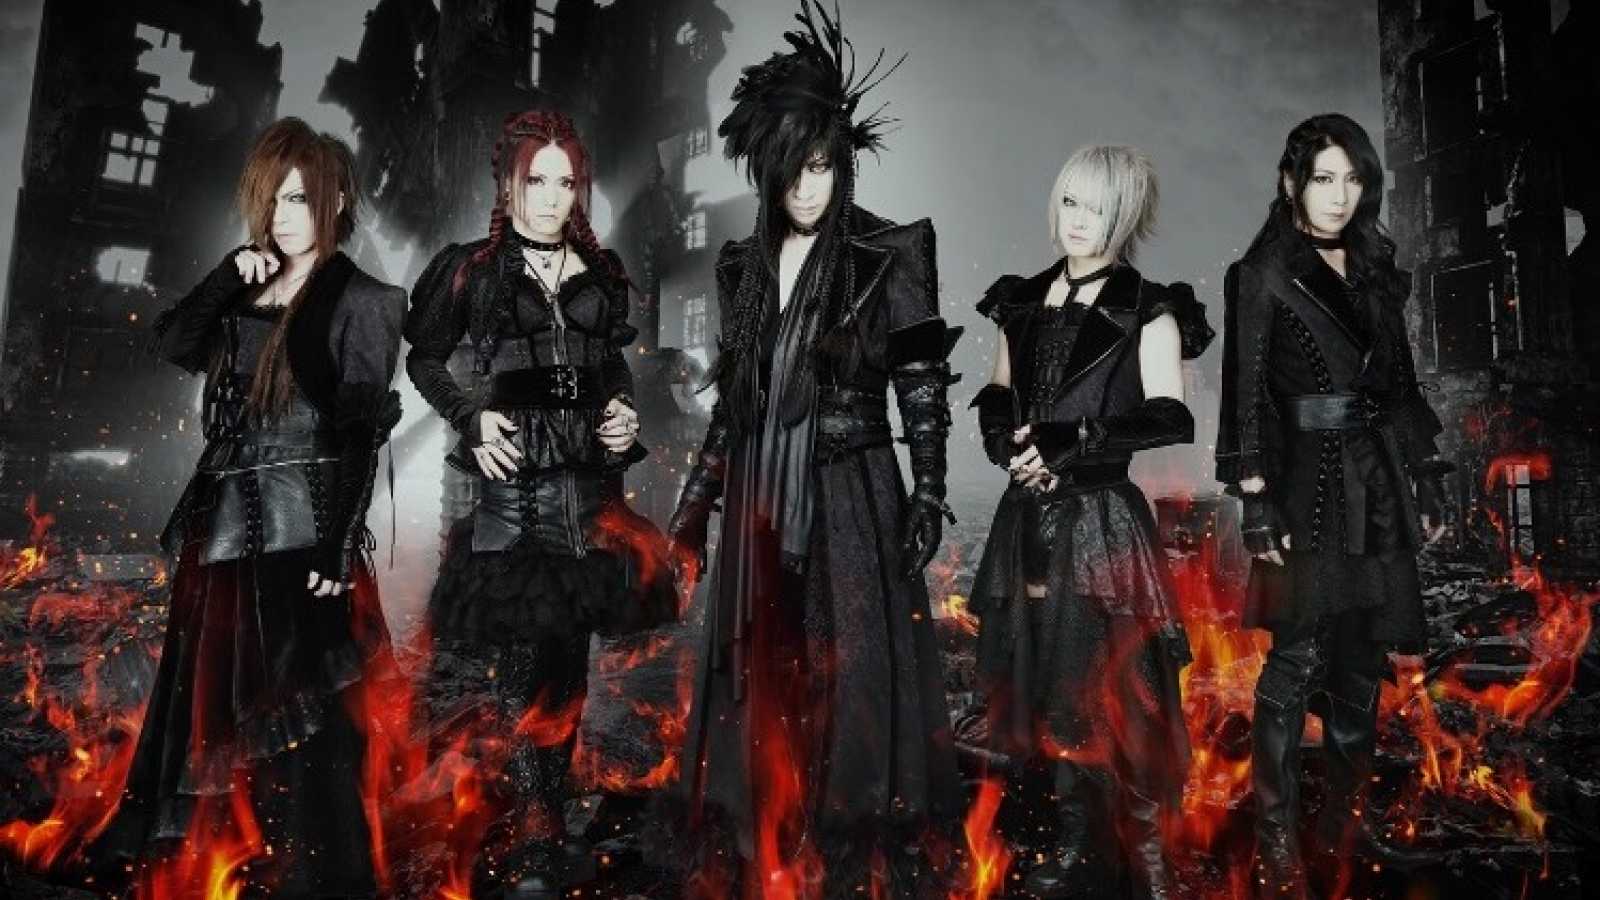 D to Stream Lock Heart Castle No-Audience Performance "Vampire Chronicle 2020" Worldwide © D. All Rights Reserved.